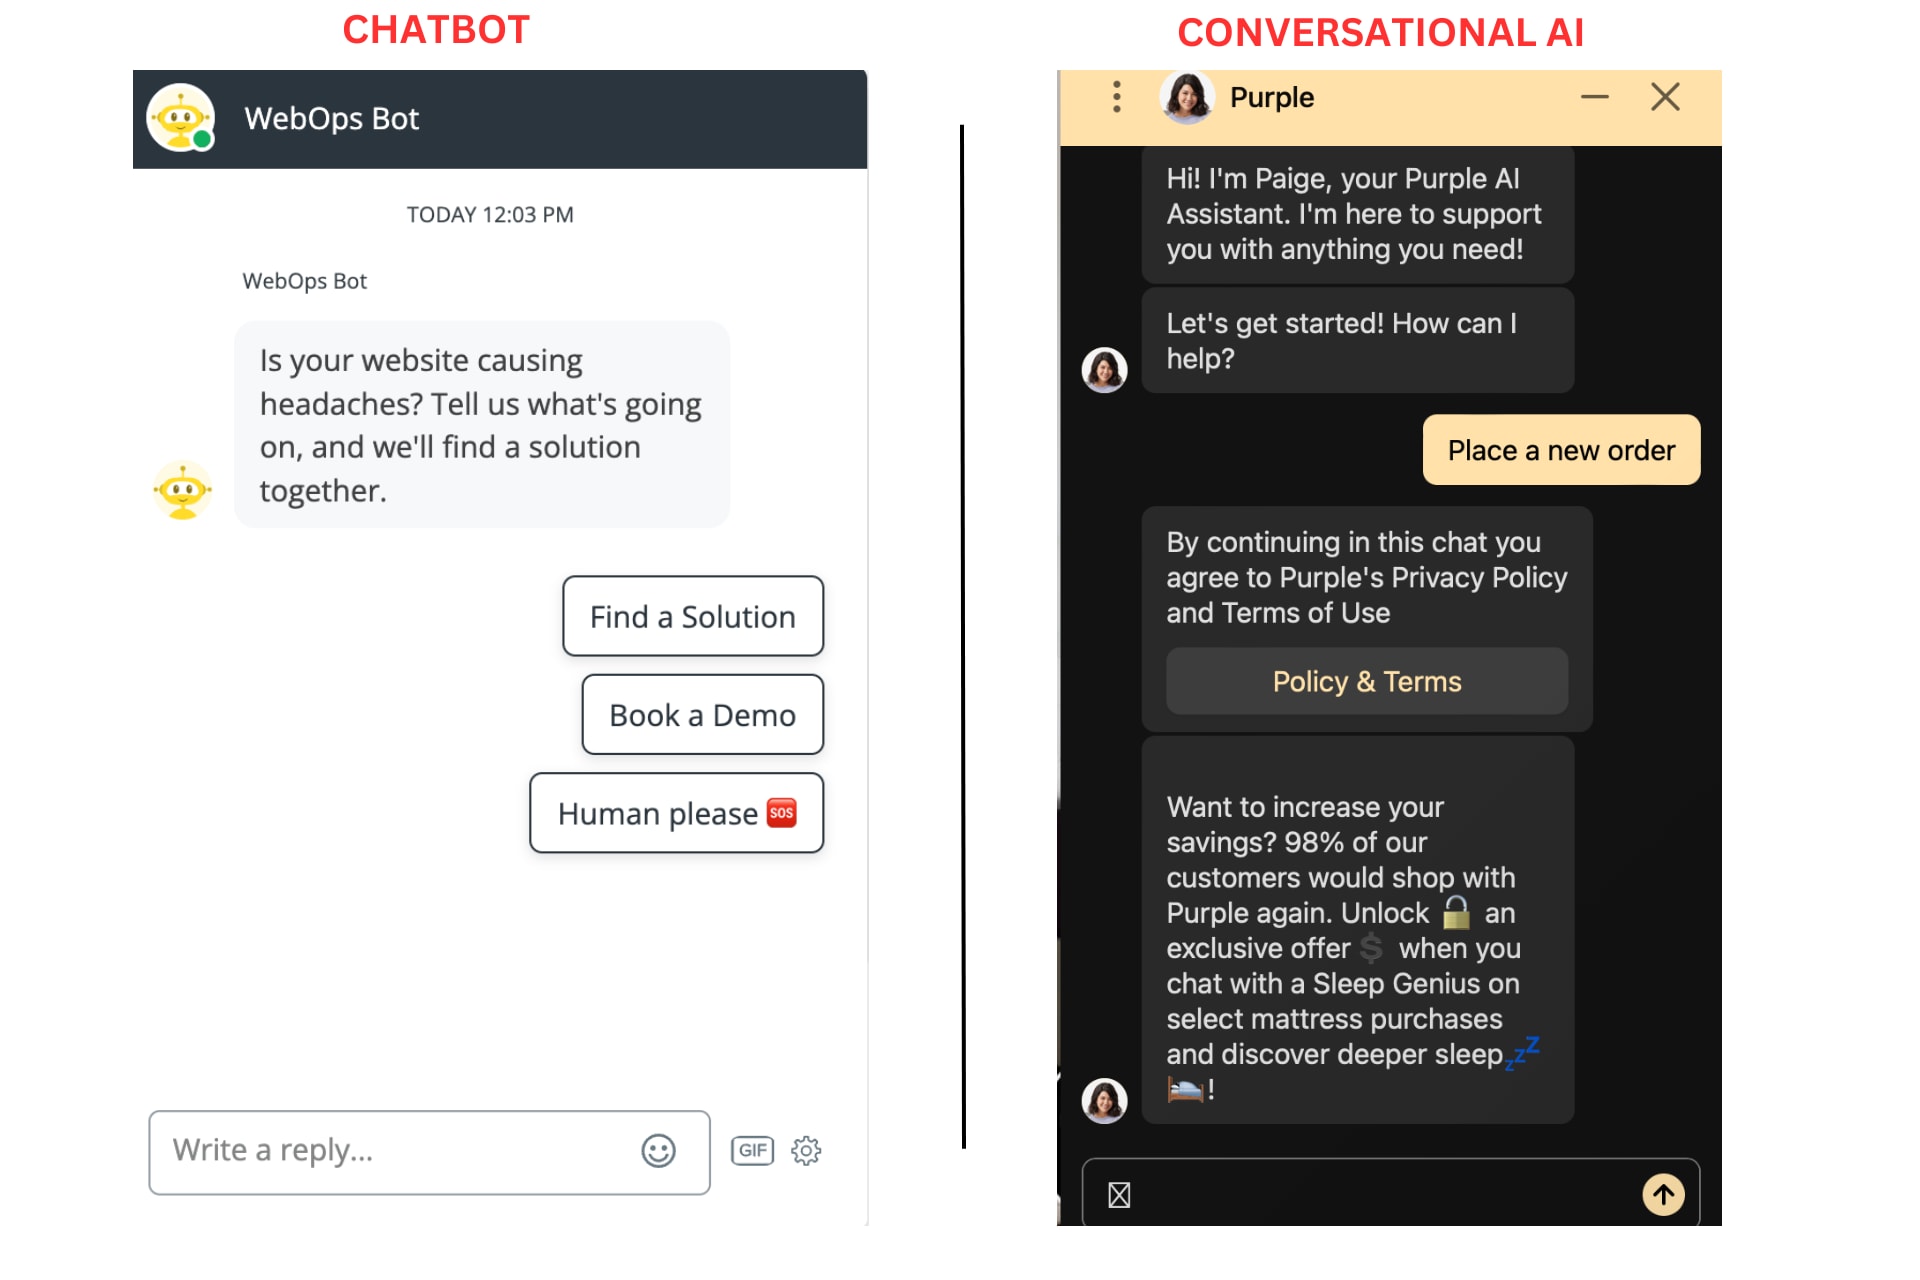 image showing the differnce between chatbot and conversational ai